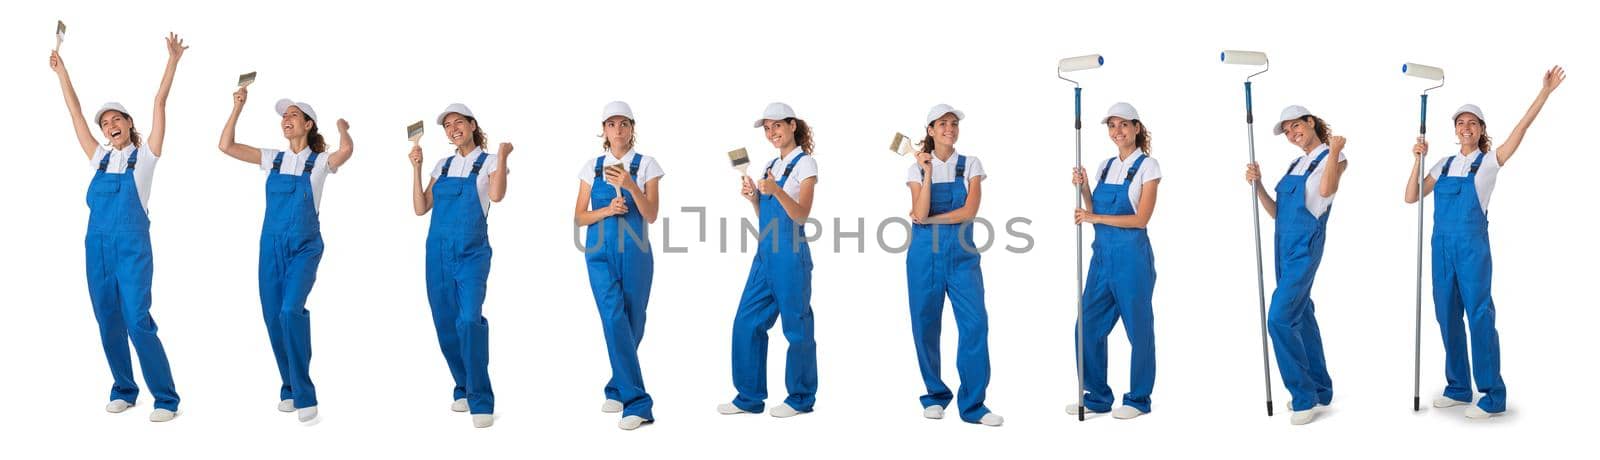 set of construction workers. portraits of woman professional painter, decorator or repairman in workwear isolated on white background. industry and building concept by ALotOfPeople